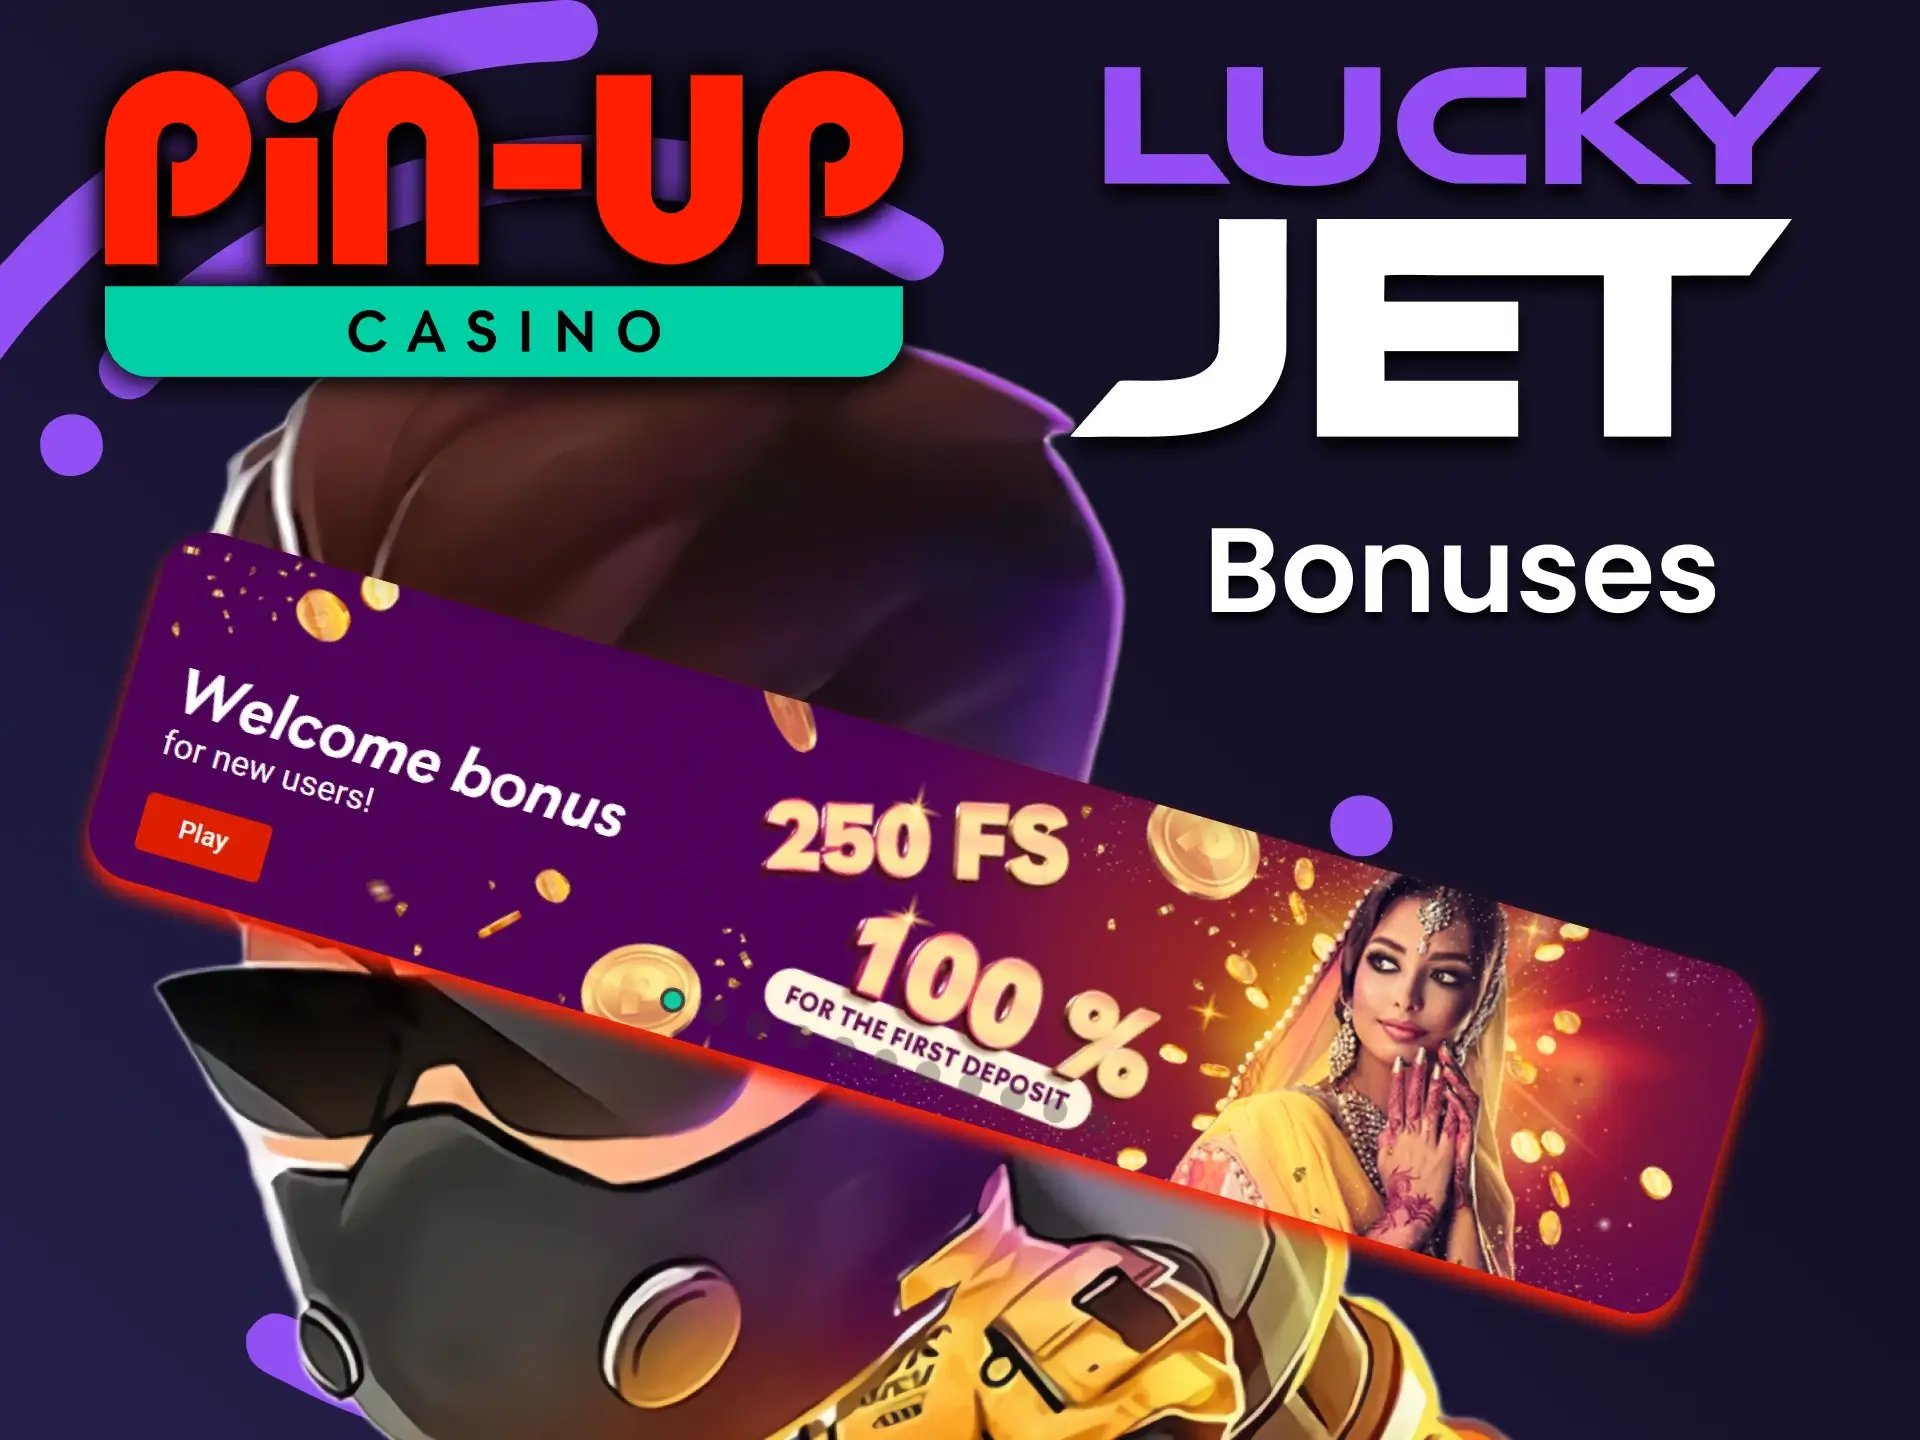 Get bonuses from Pin Up for playing Lucky Jet.